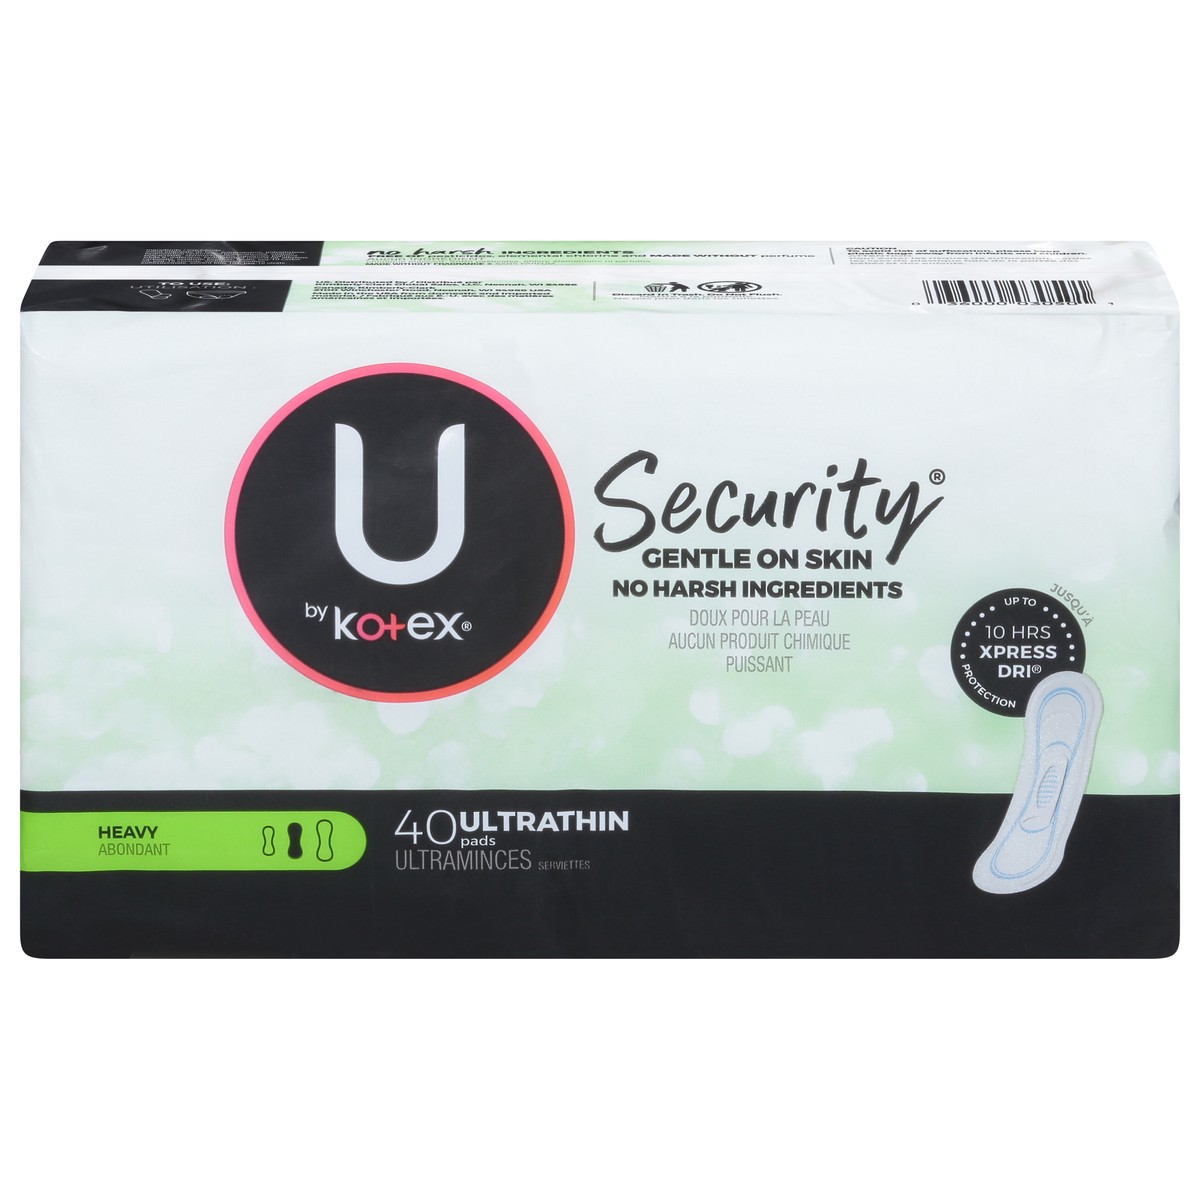 slide 9 of 16, U by Kotex Security Heavy Ultra Thin Pads 40 ea, 40 ct